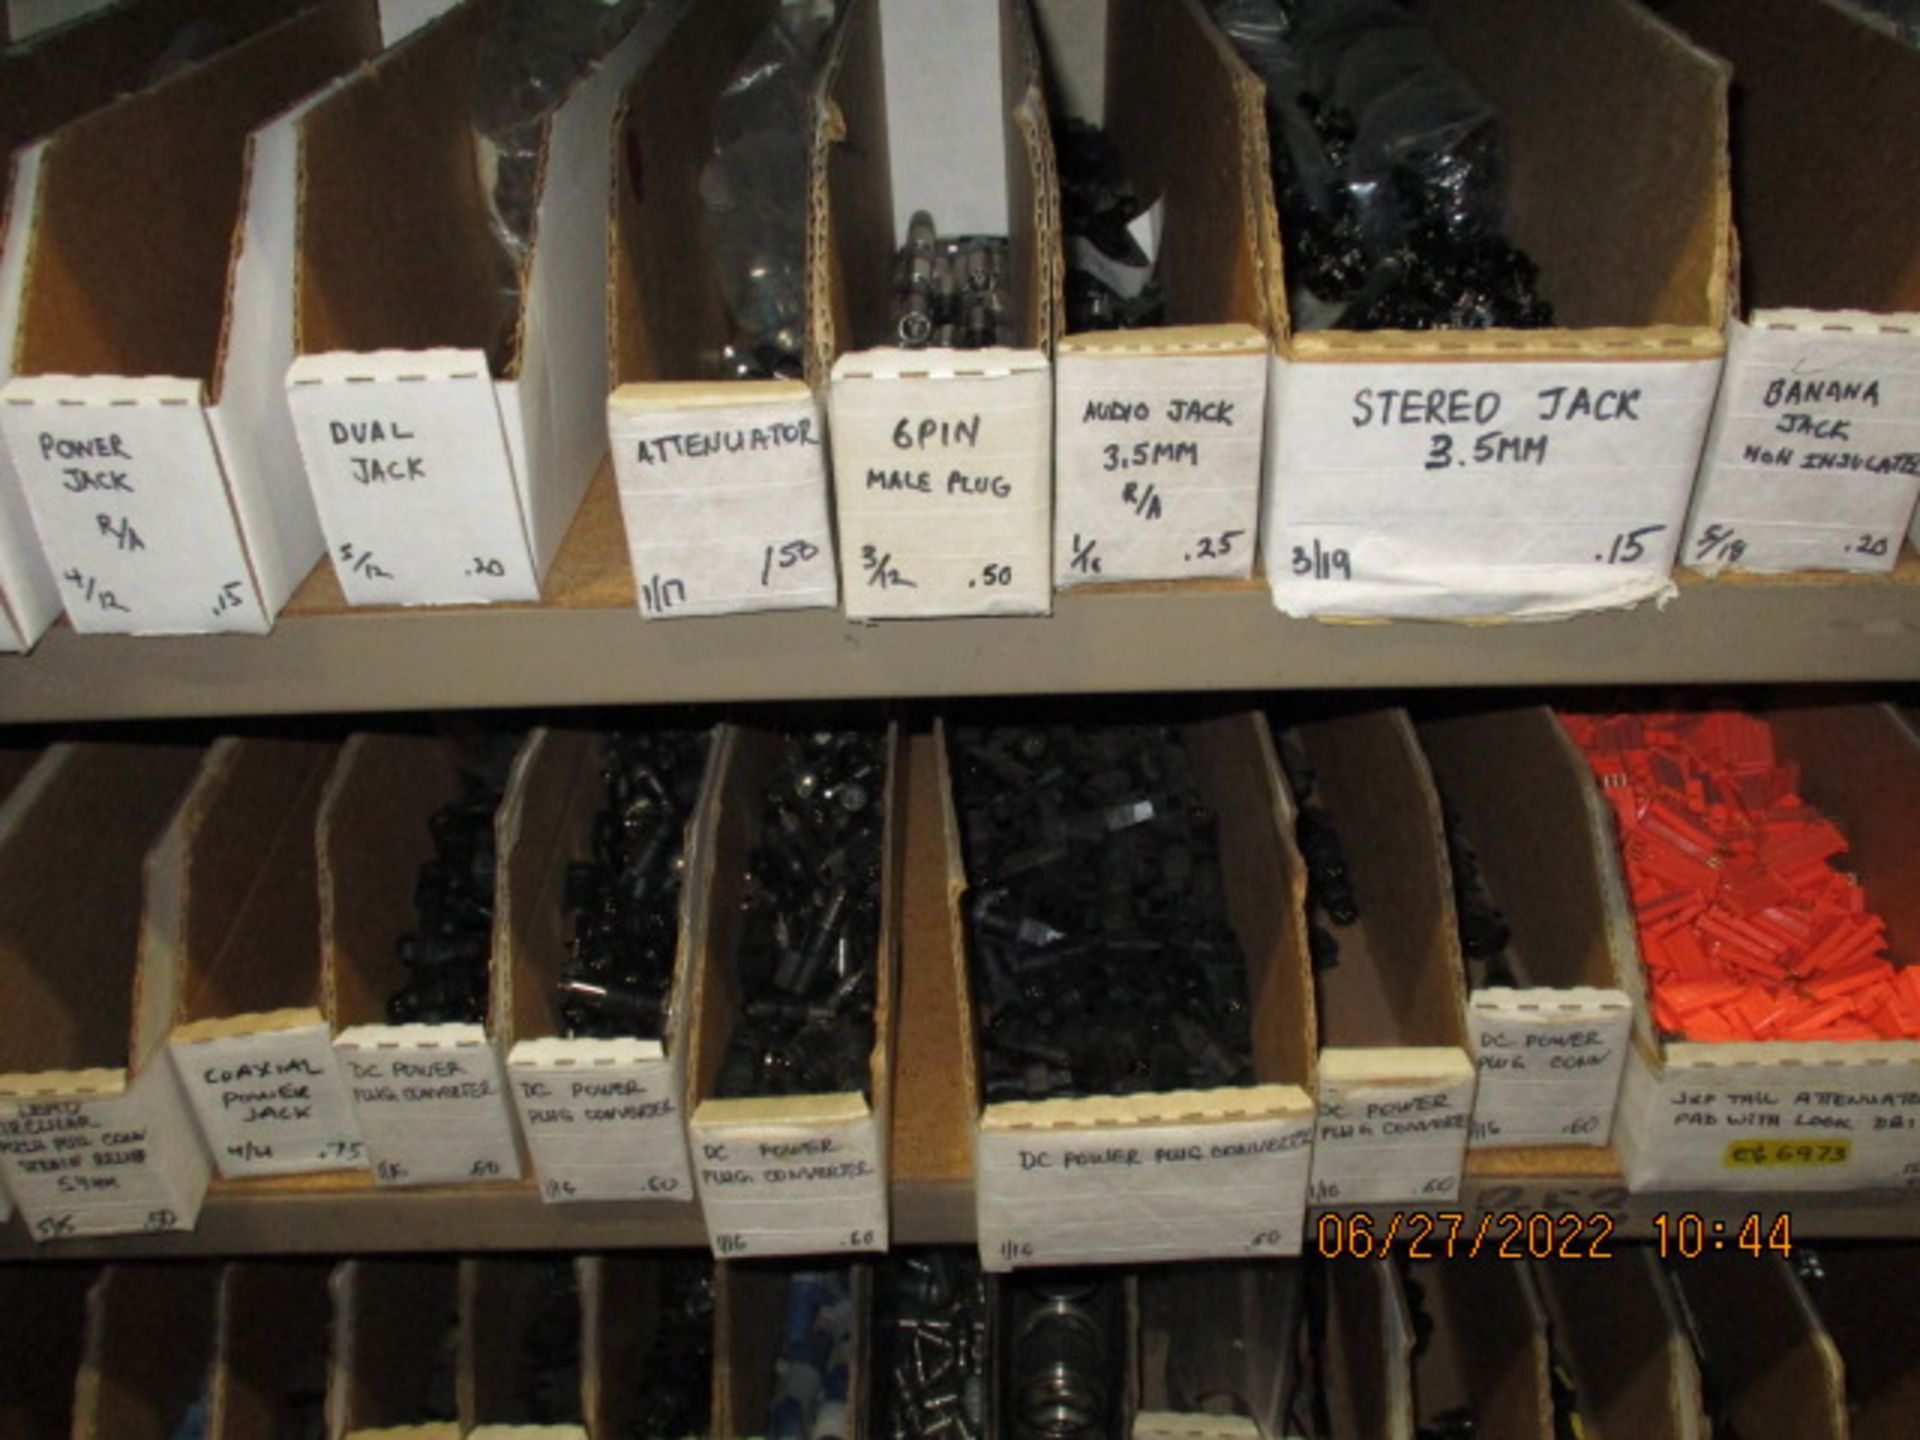 CONTENTS OF SHELVING UNIT CONSISTING OF RCA JACKS, RCA CONNECTORS GOLD, RCA DUAL IN/OUT JACKS, - Image 6 of 7